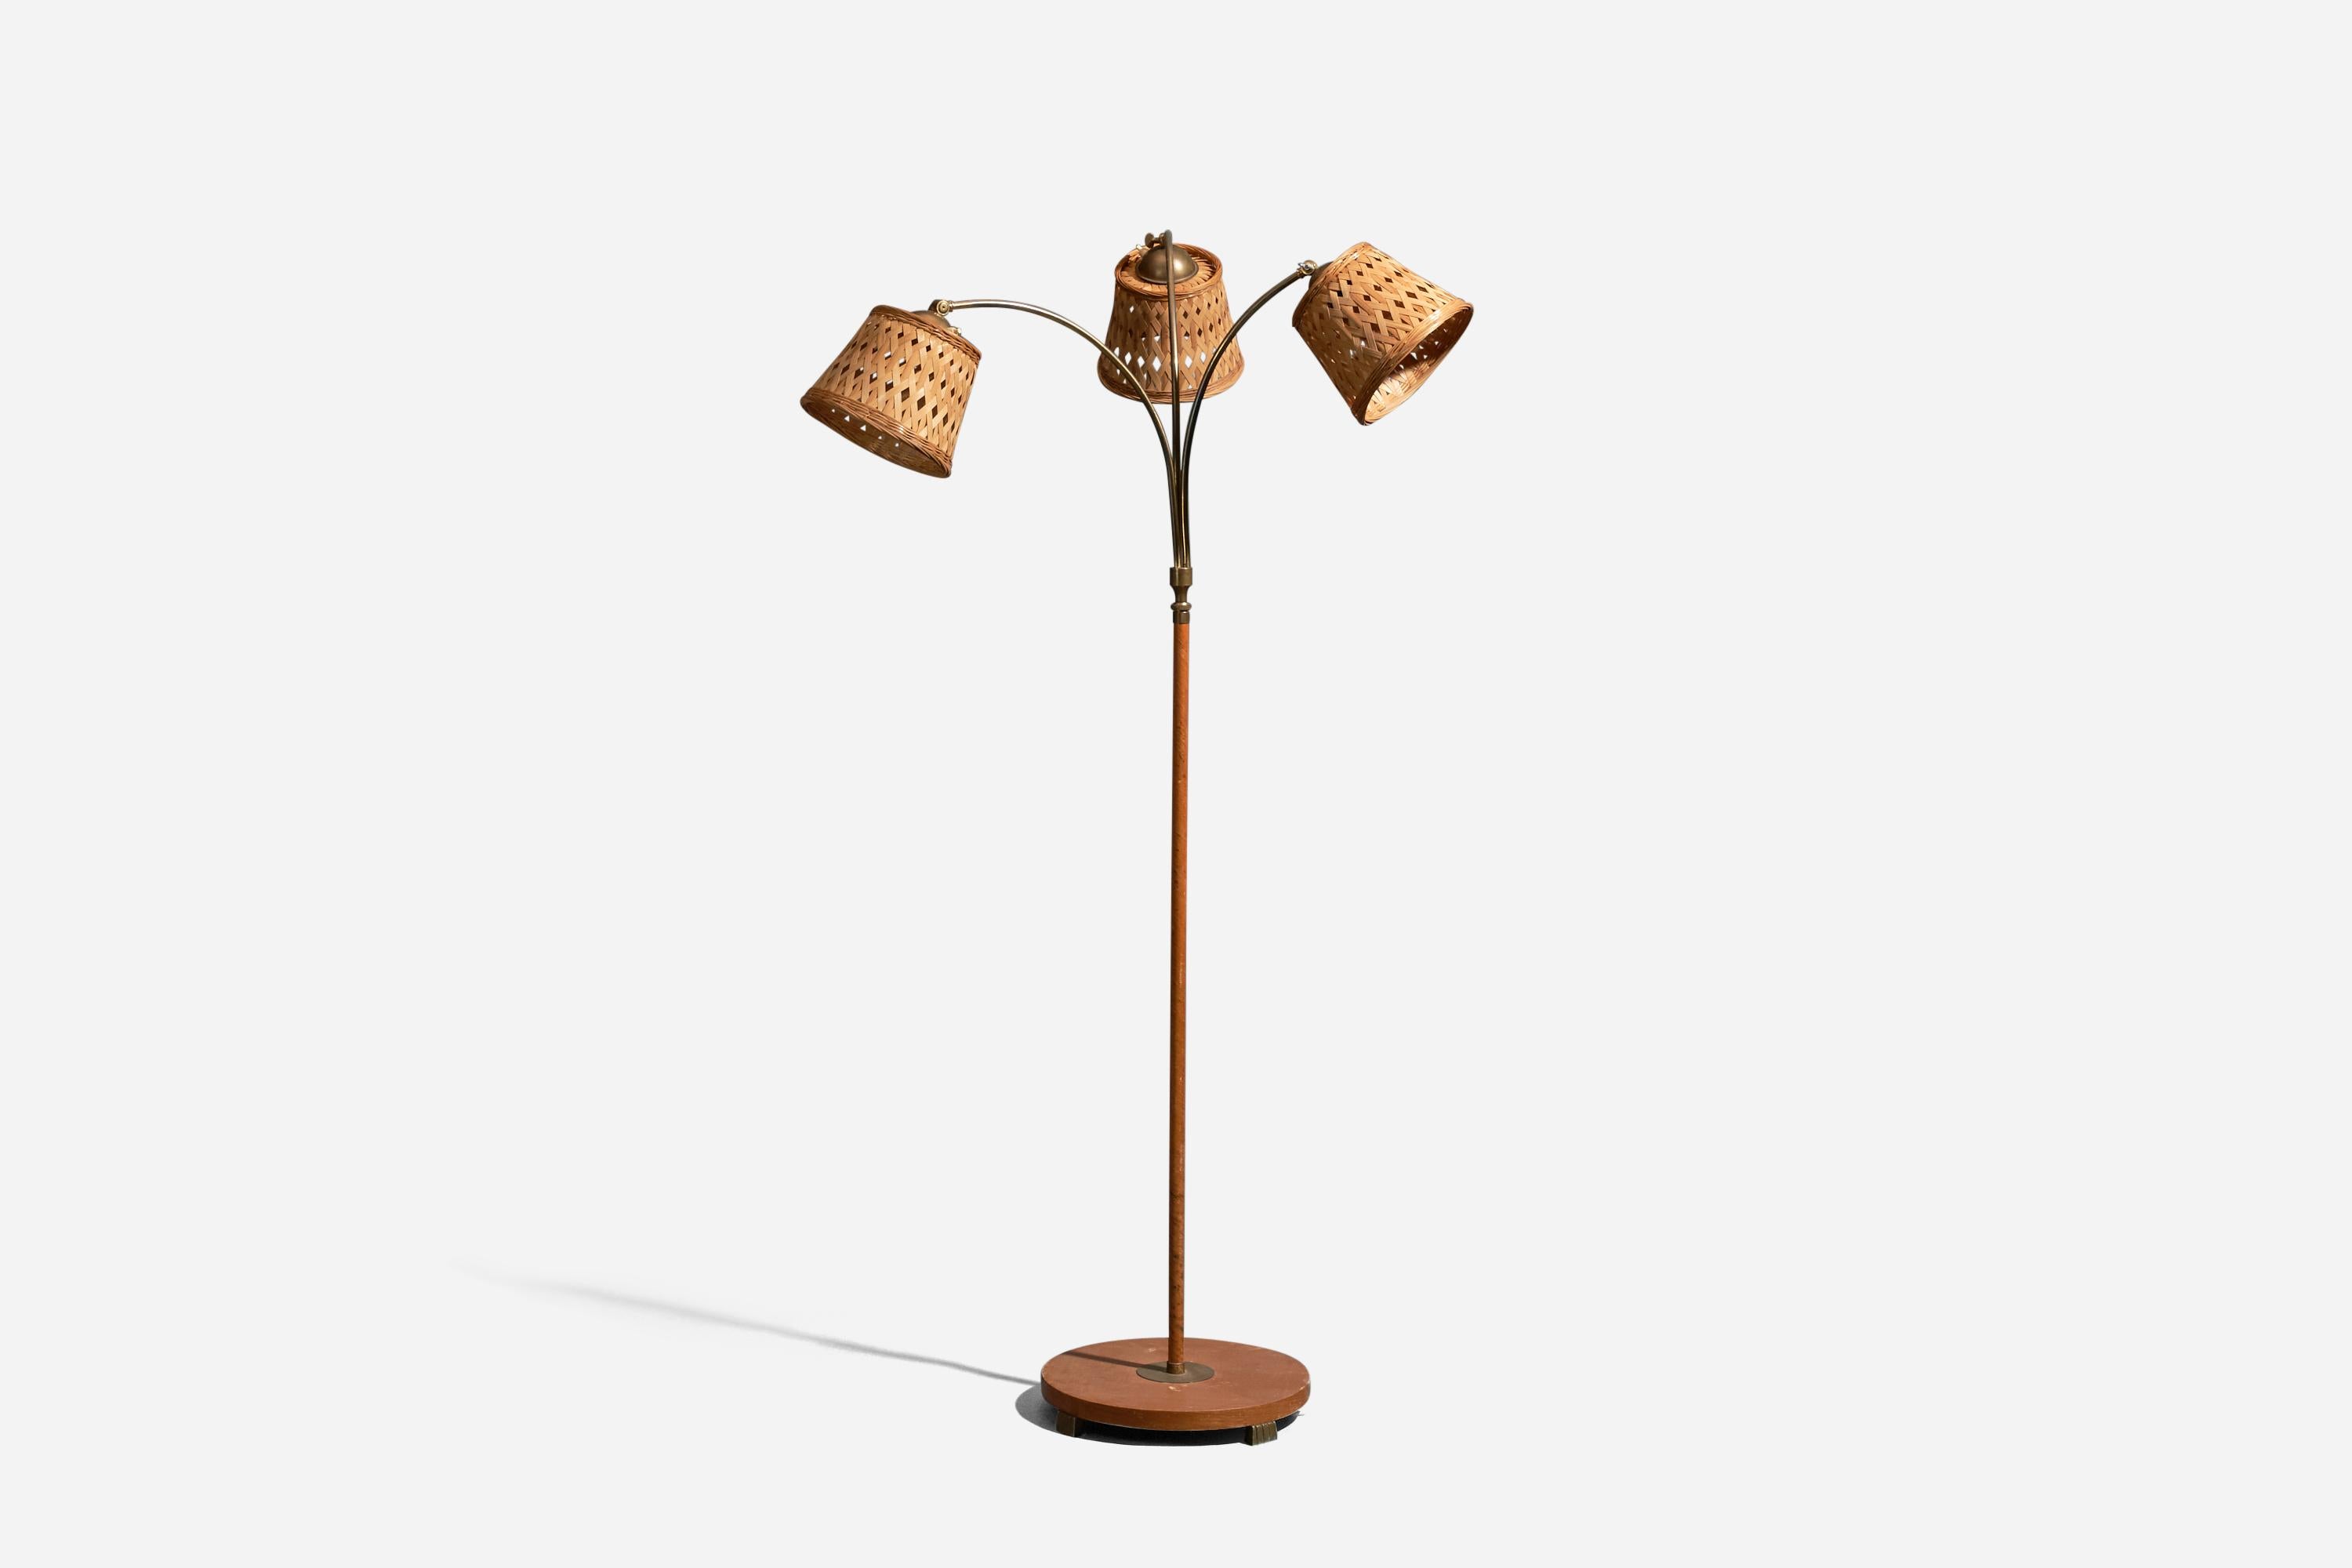 An adjustable, brass, wood, veneer and rattan floor lamp designed and produced in Sweden, 1930s.

Dimensions variable, measured as illustrated in first image.

Sold with Lampshades. Dimensions stated are of Floor Lamp with Lampshades.